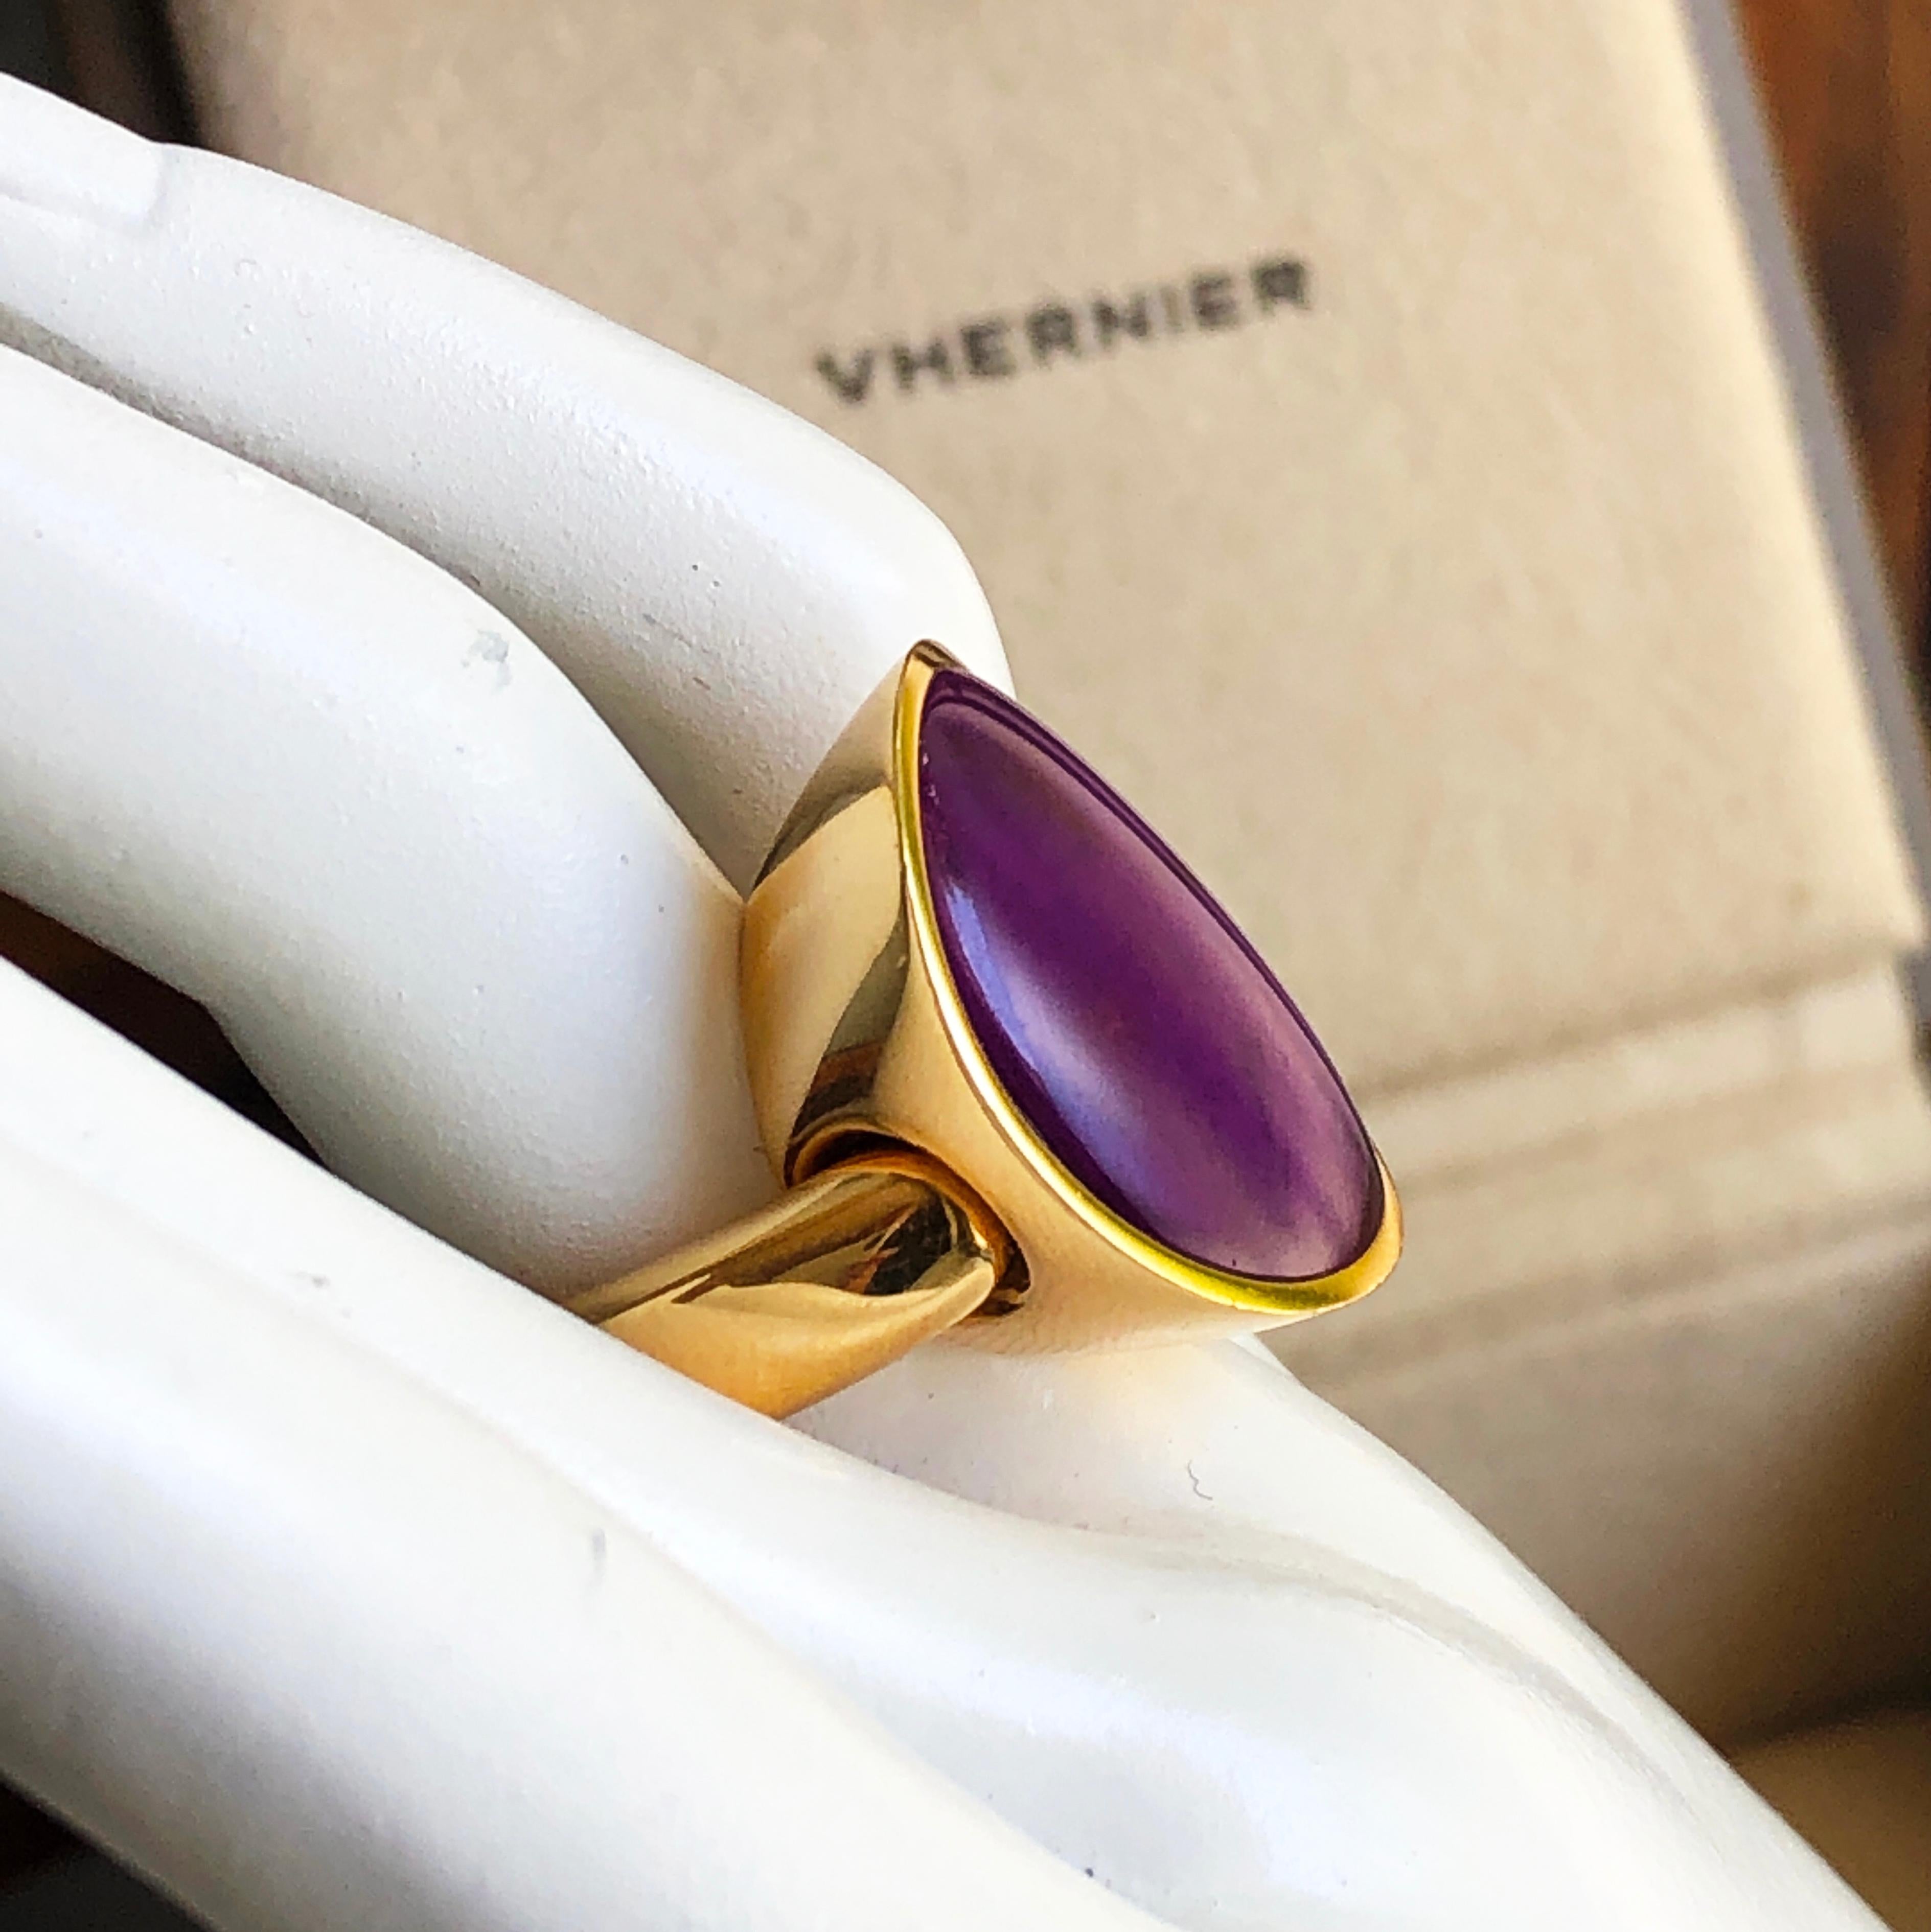 Vhernier Rare Sugilite Rock Cystal Giotto Collection Yellow Gold Cocktail Ring 6